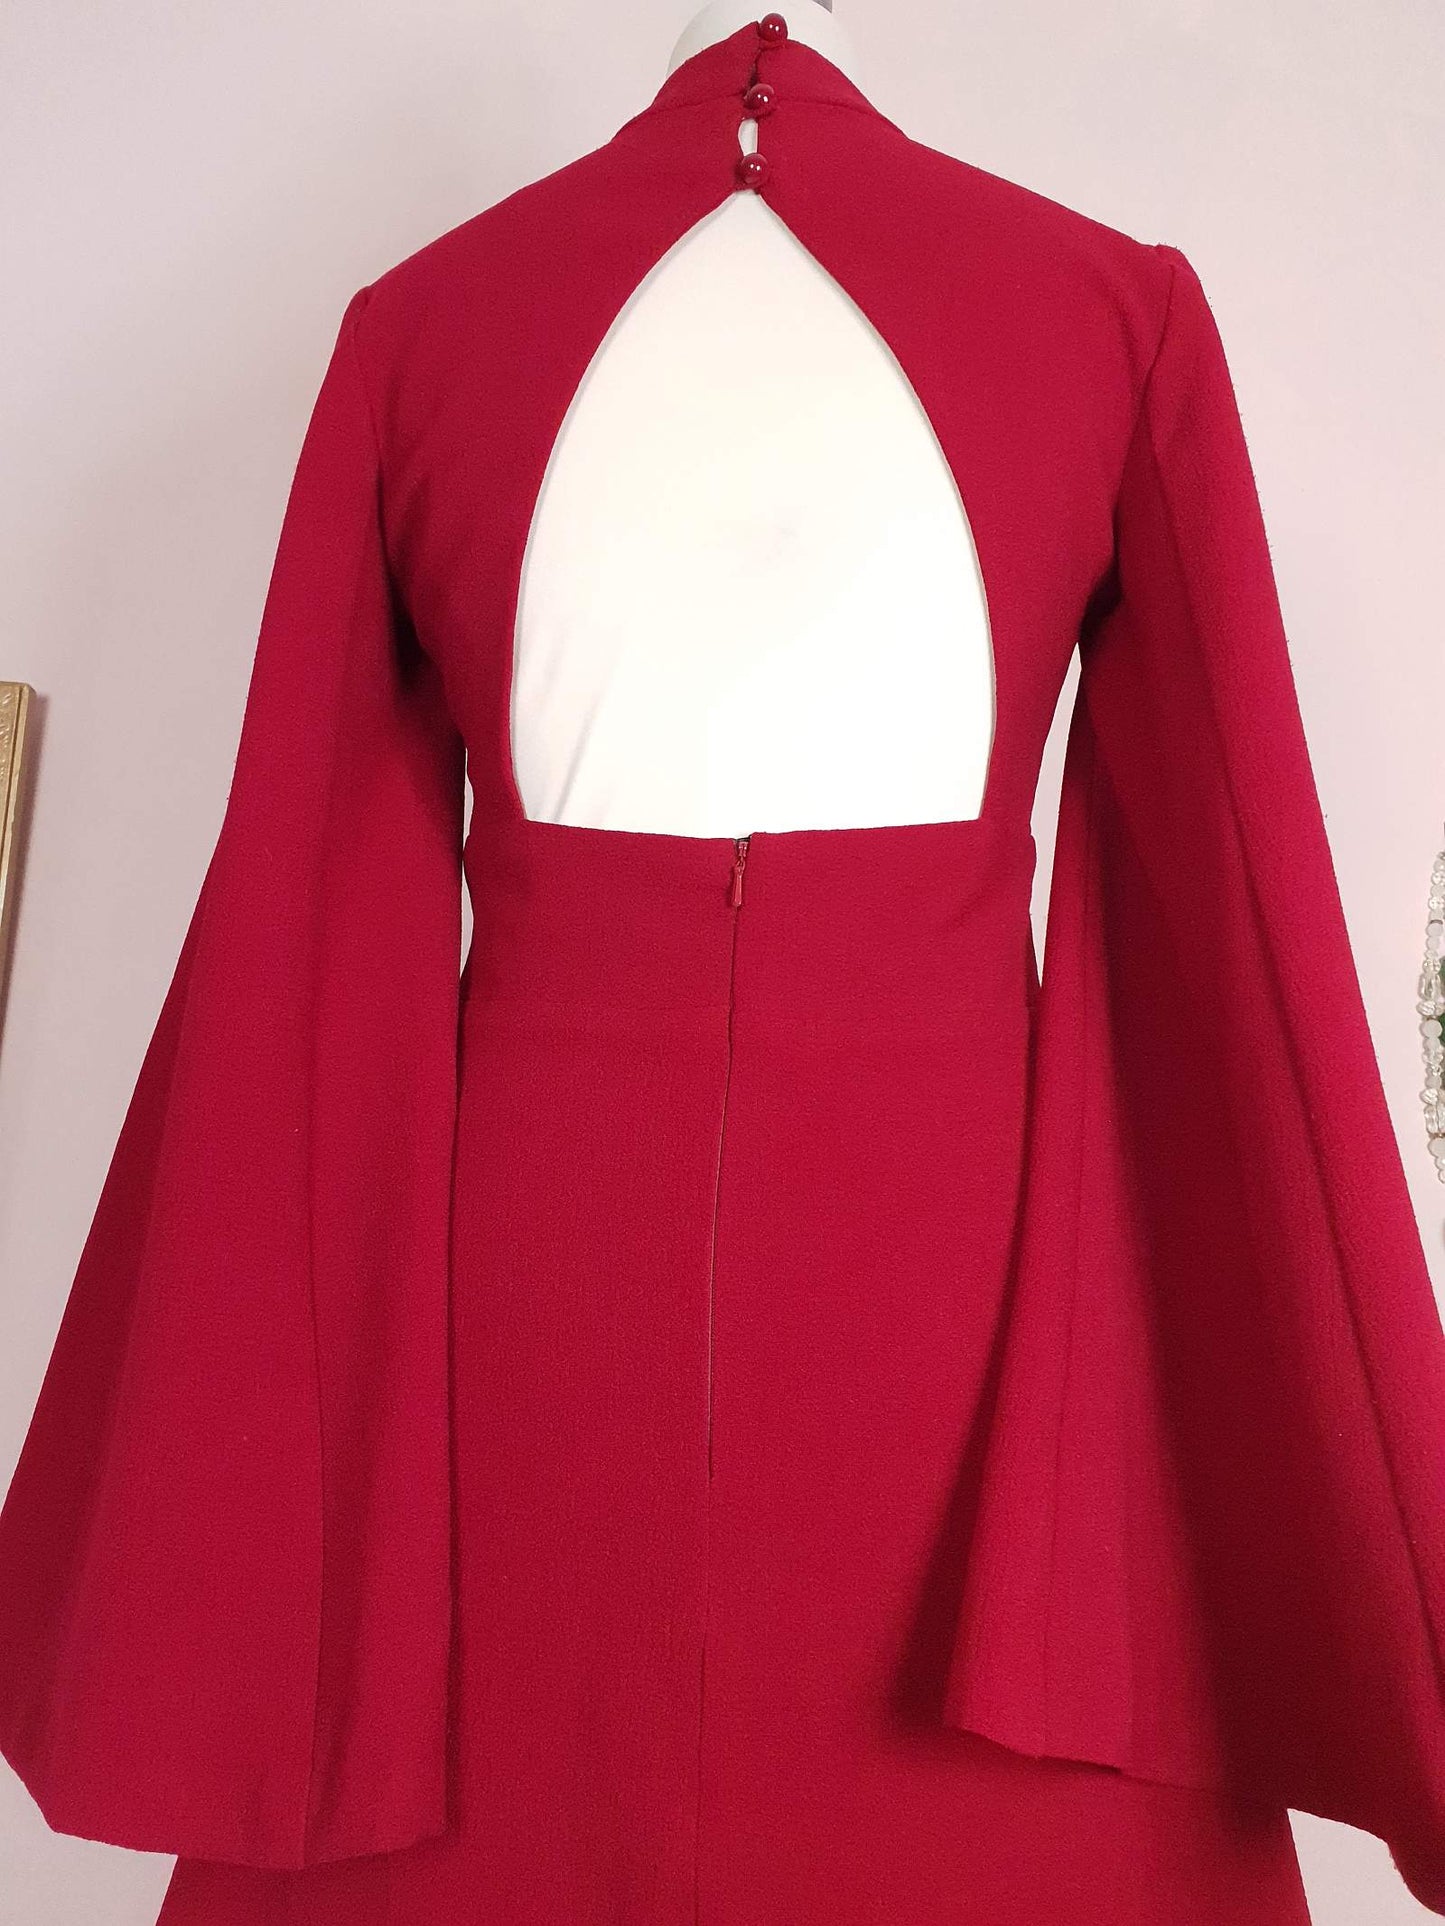 Pre-owned Red Dress Bell Sleeves Size 6 Knee Length